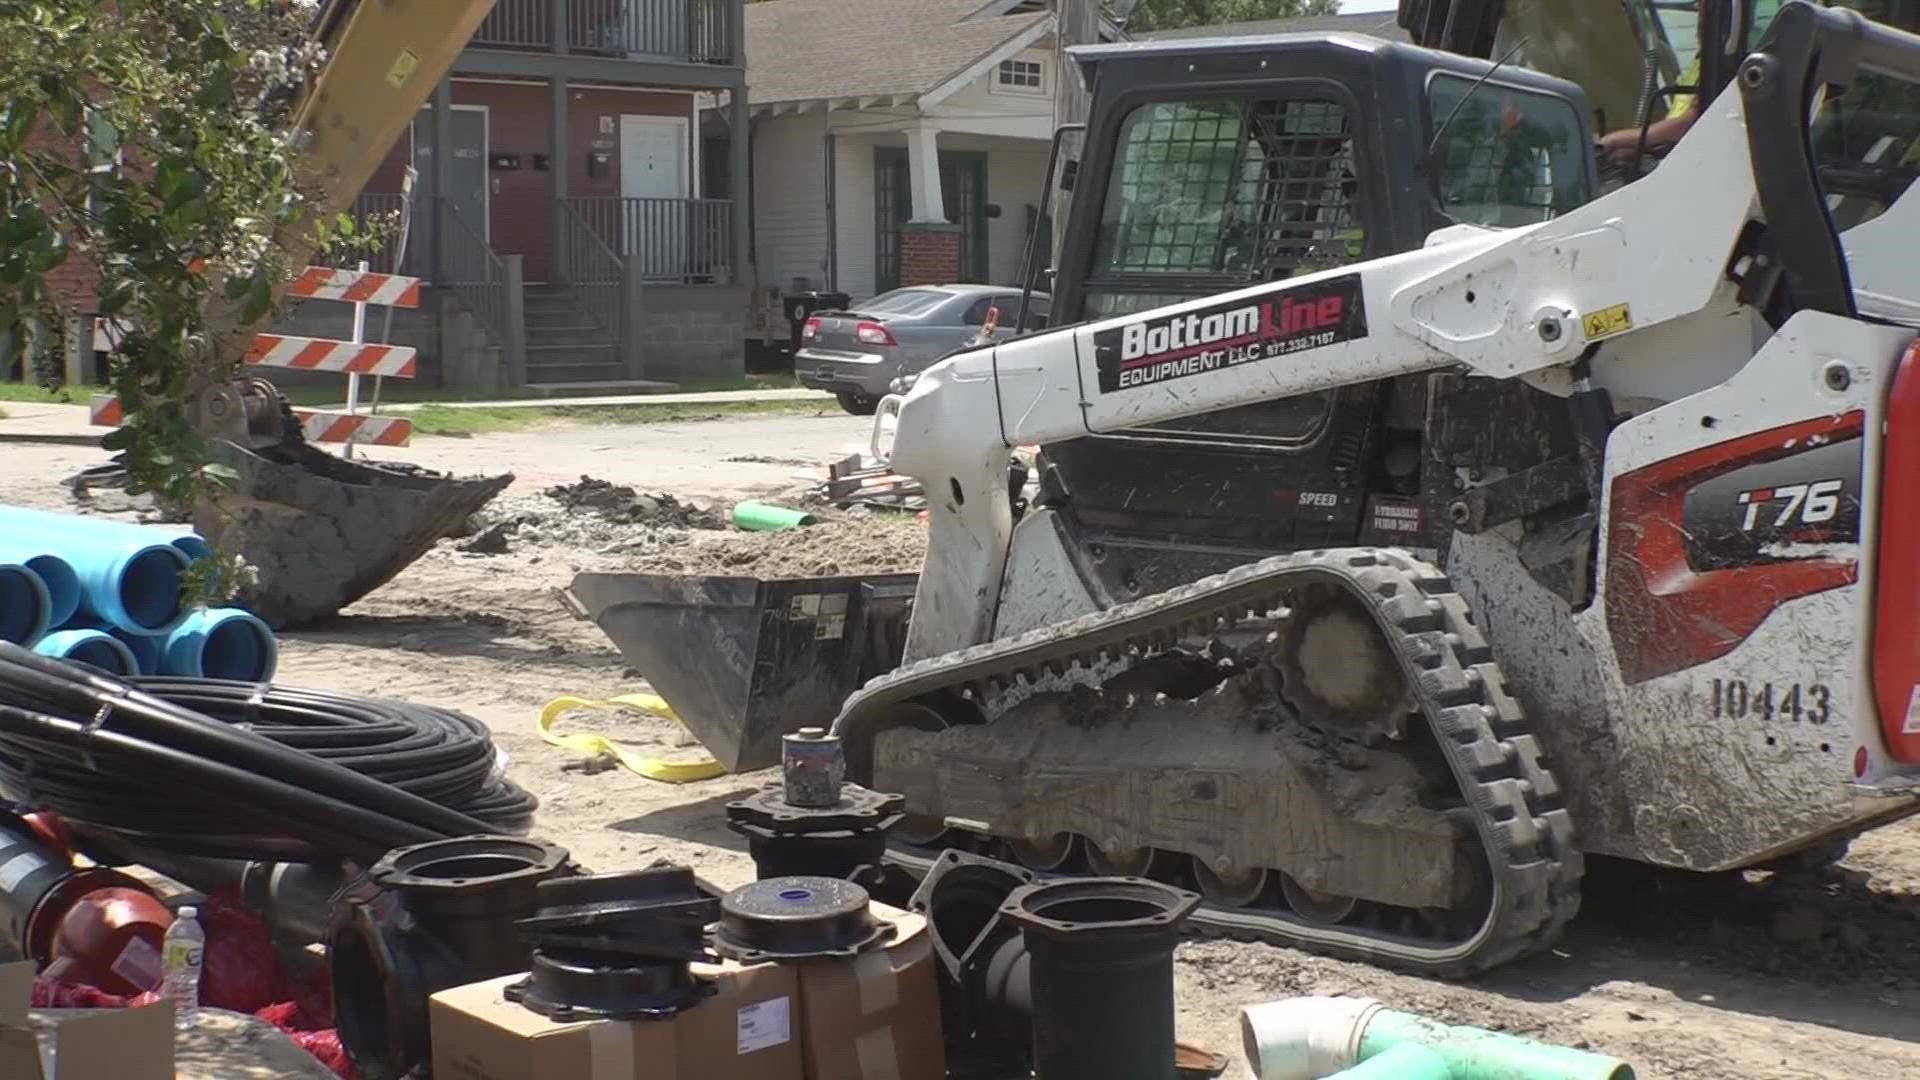 An update on NOLA Roadwork shows crews are working on sewer lines, but a drain is on hold due to supply chain issues